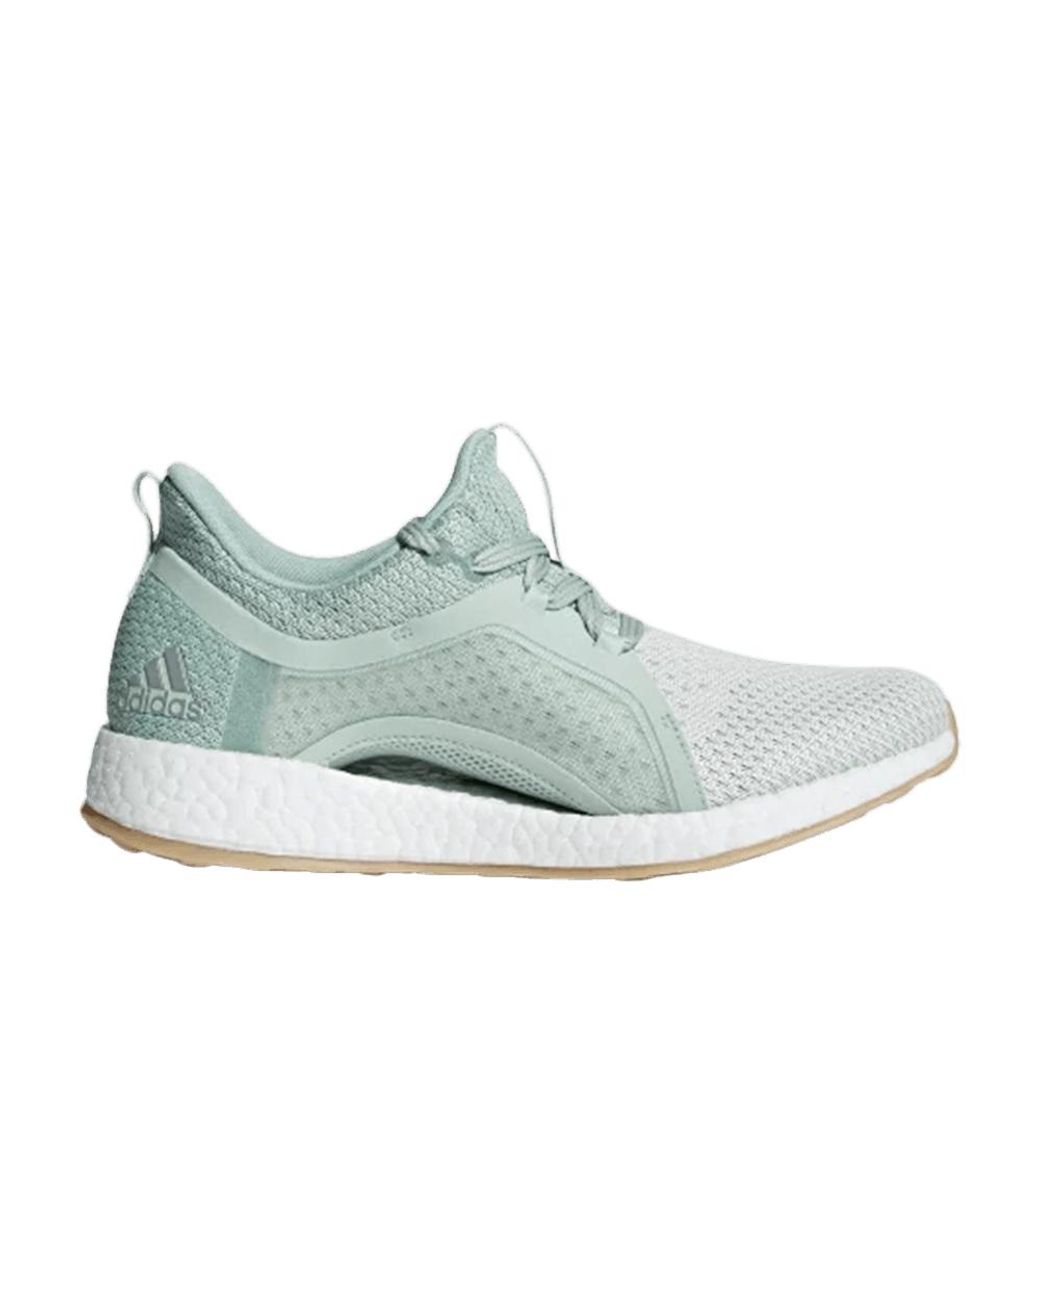 adidas Pureboost X Clima Shoes in Green 